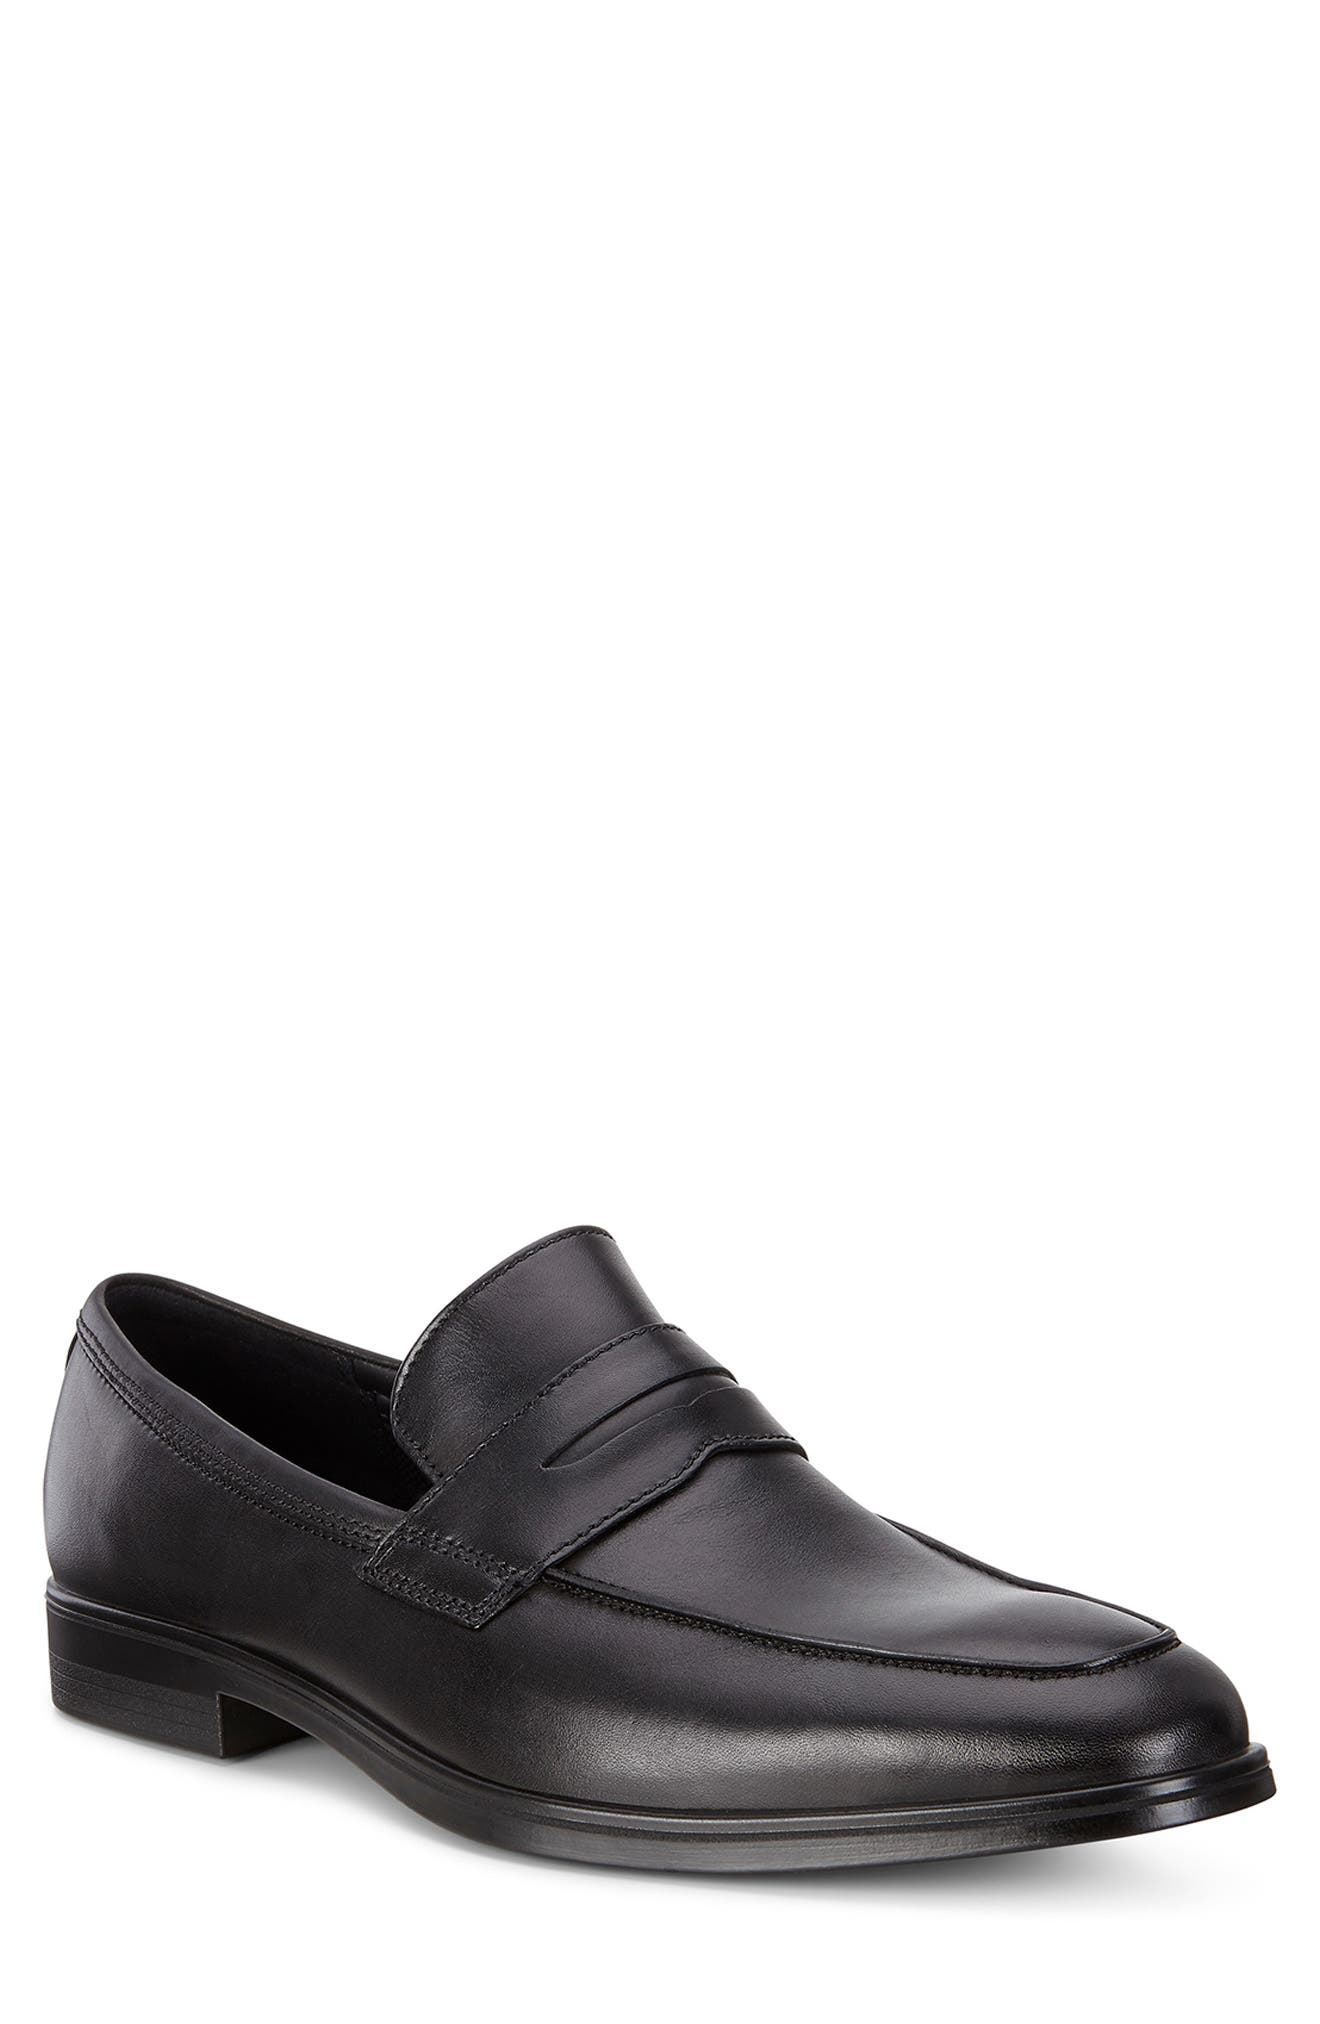 ecco penny loafer